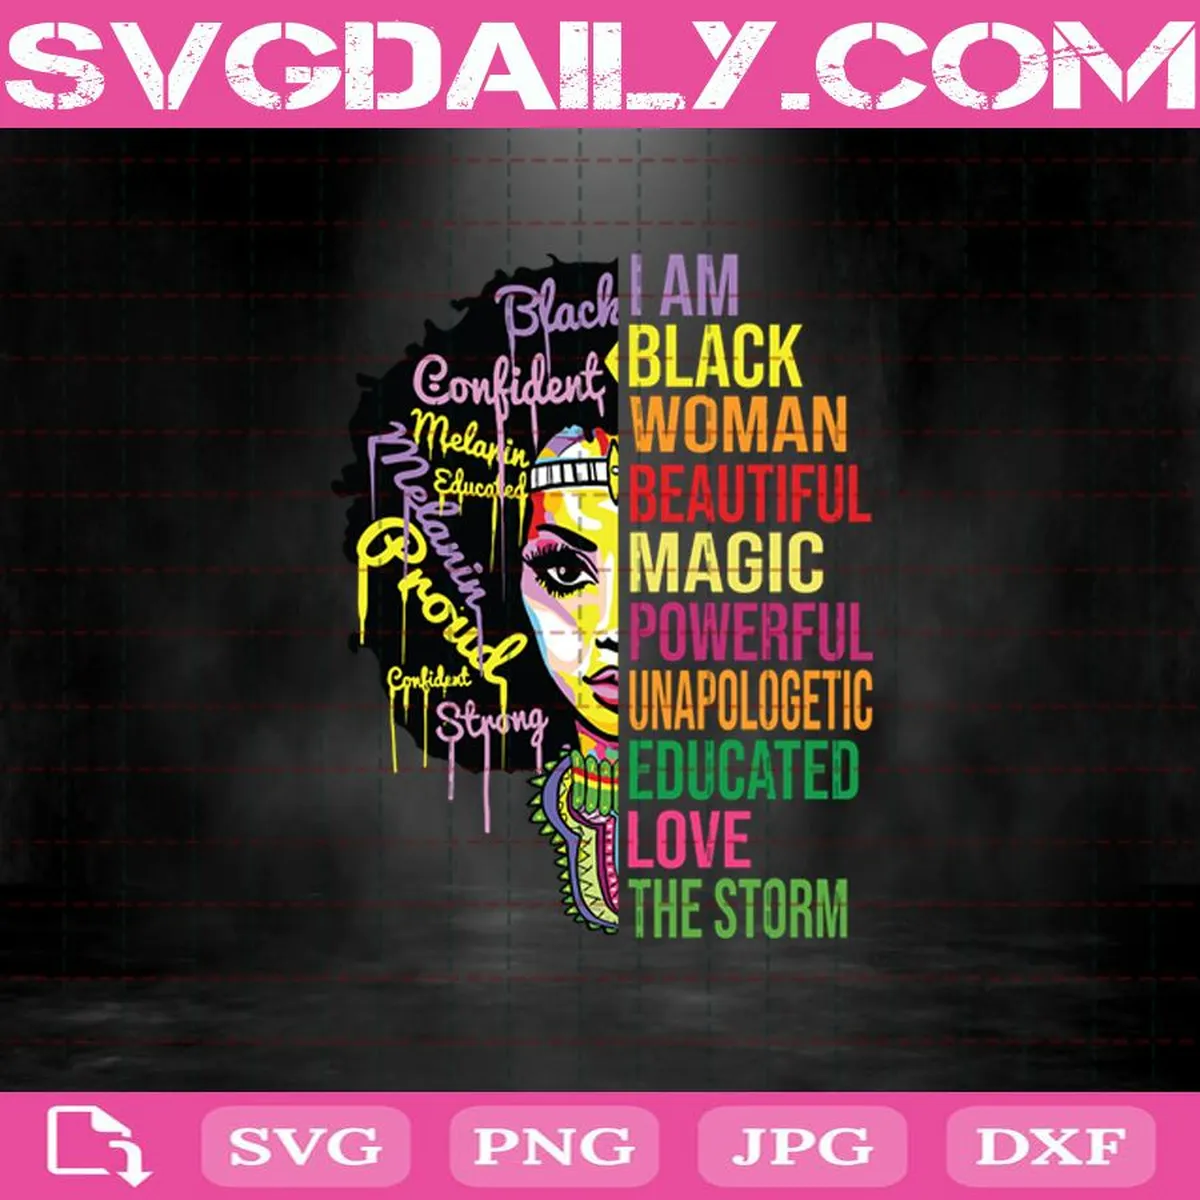 I Am Black Woman Beautiful Magic Powerful Unapologetic Educated Love The Storm Svg, Black Queen Svg, African American Svg